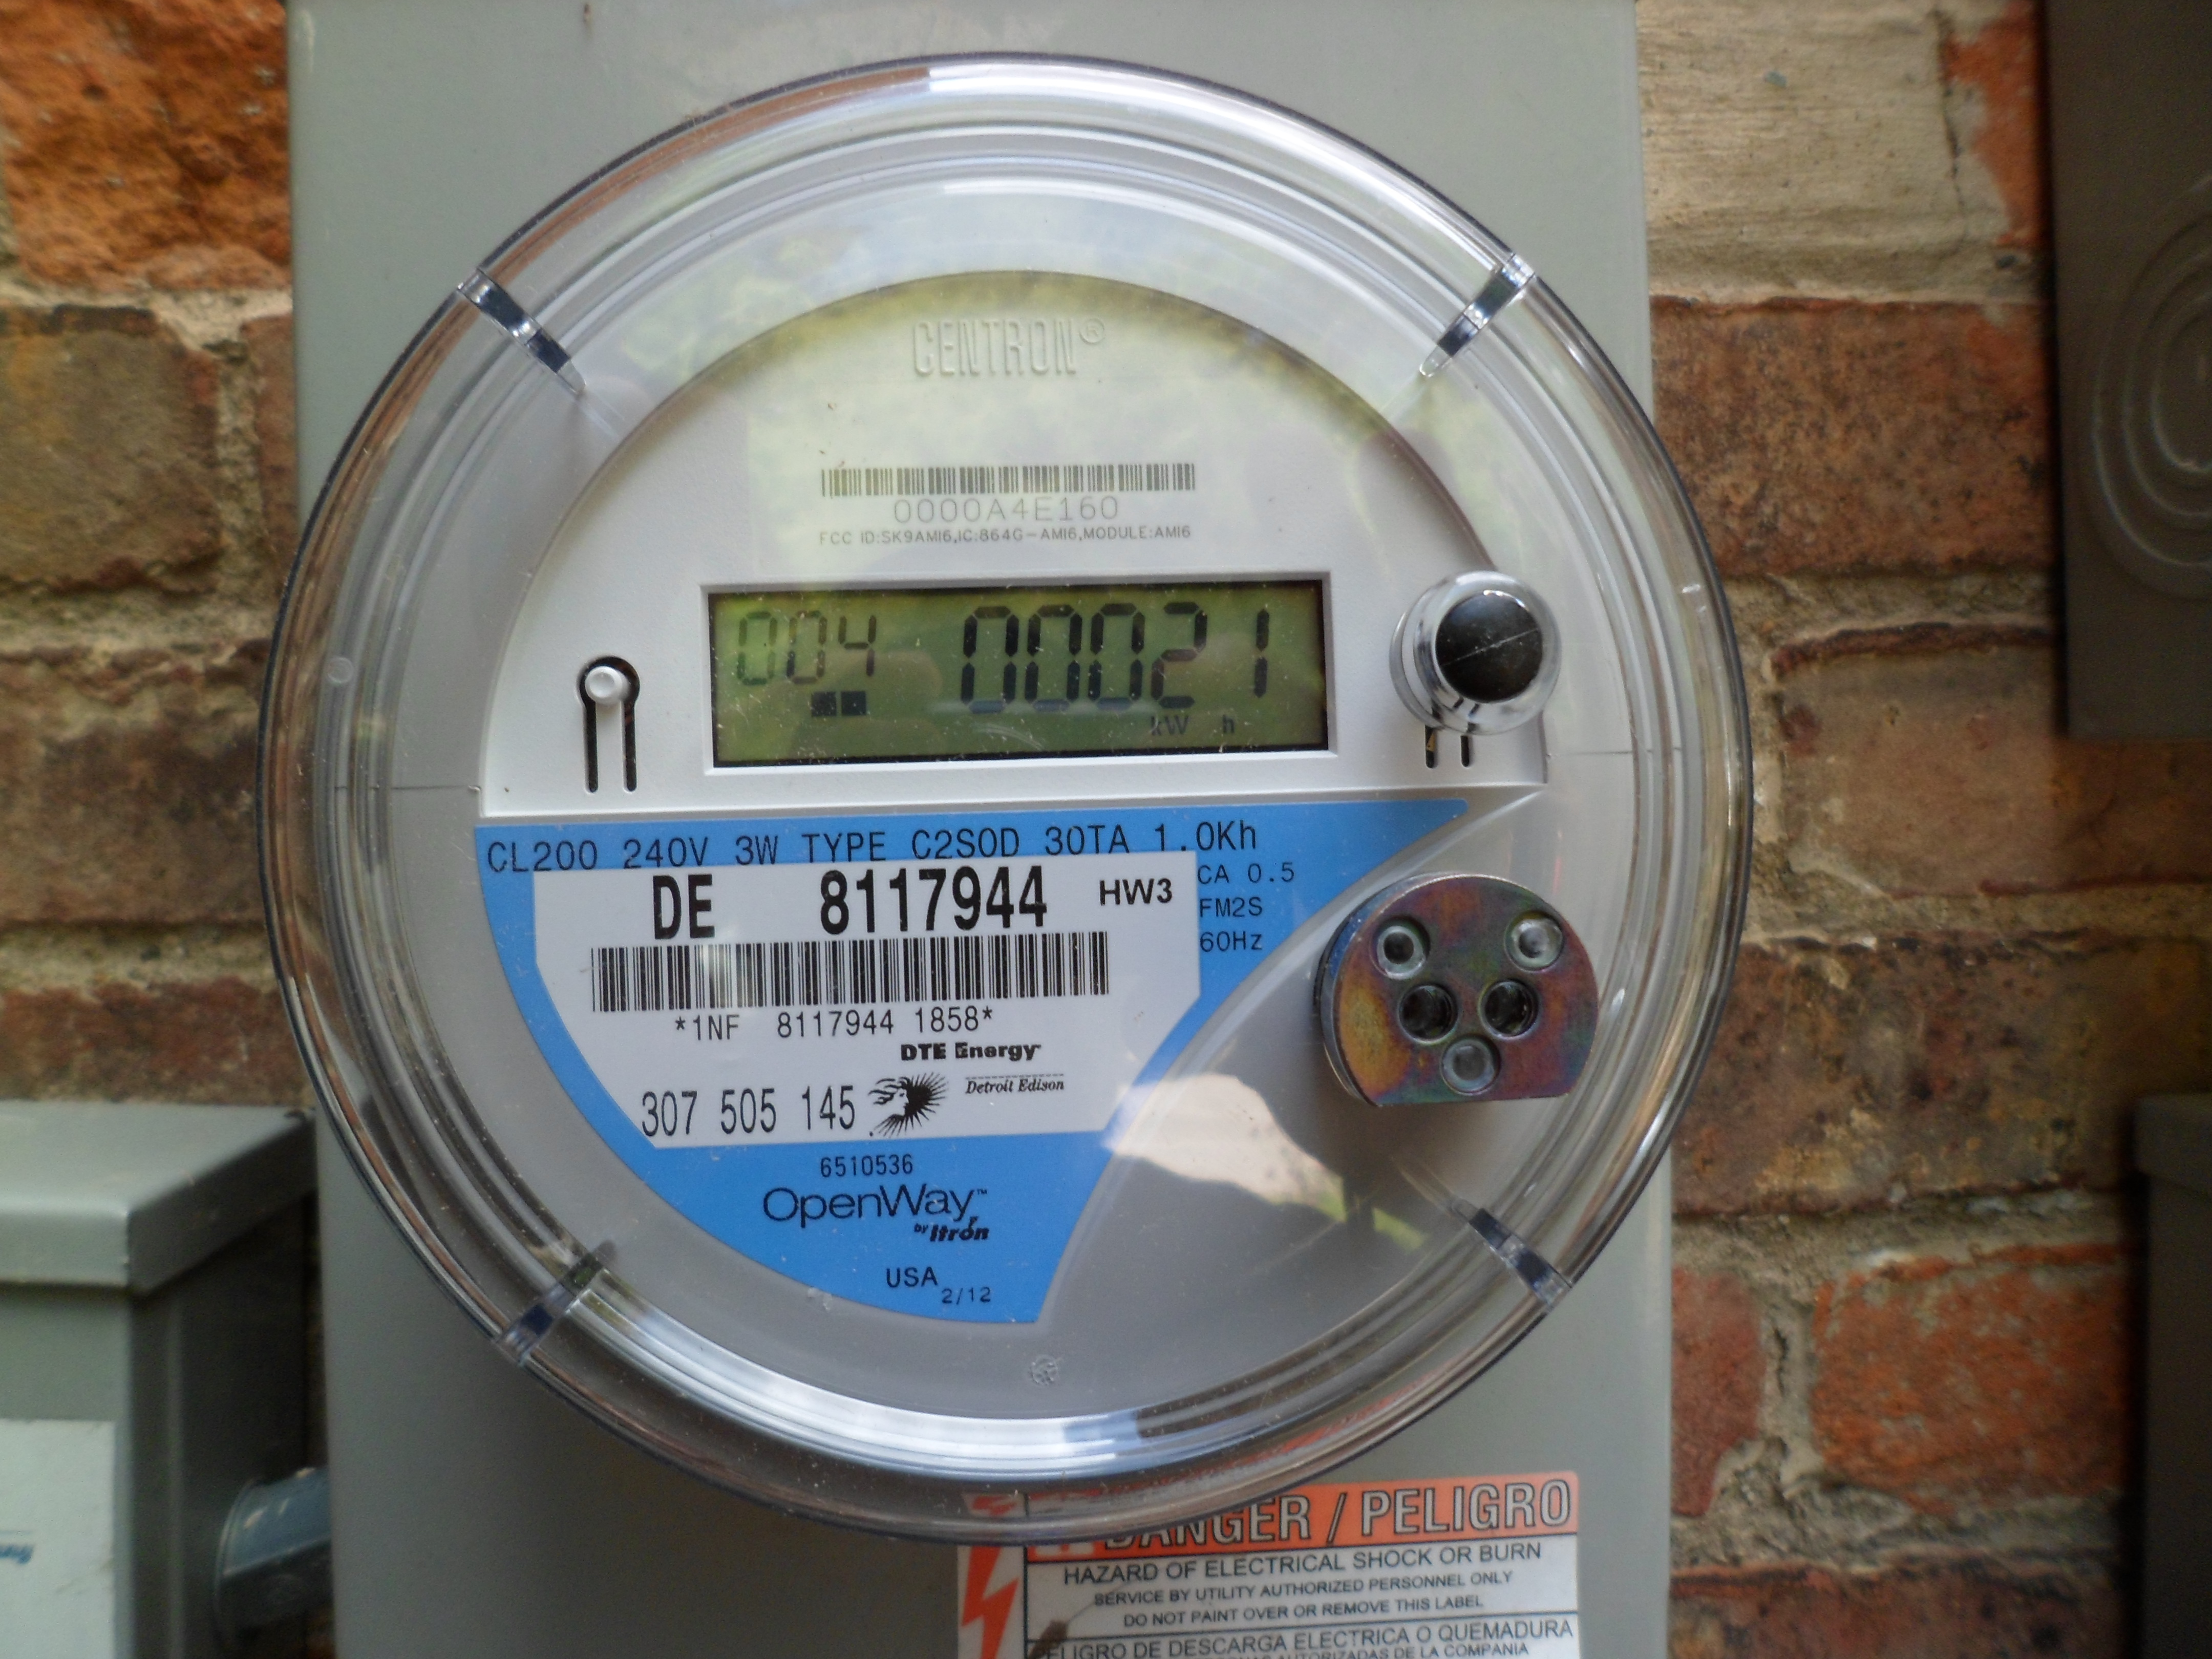 New Utility Meters Puts a Hold on Monitoring | SolarYpsi